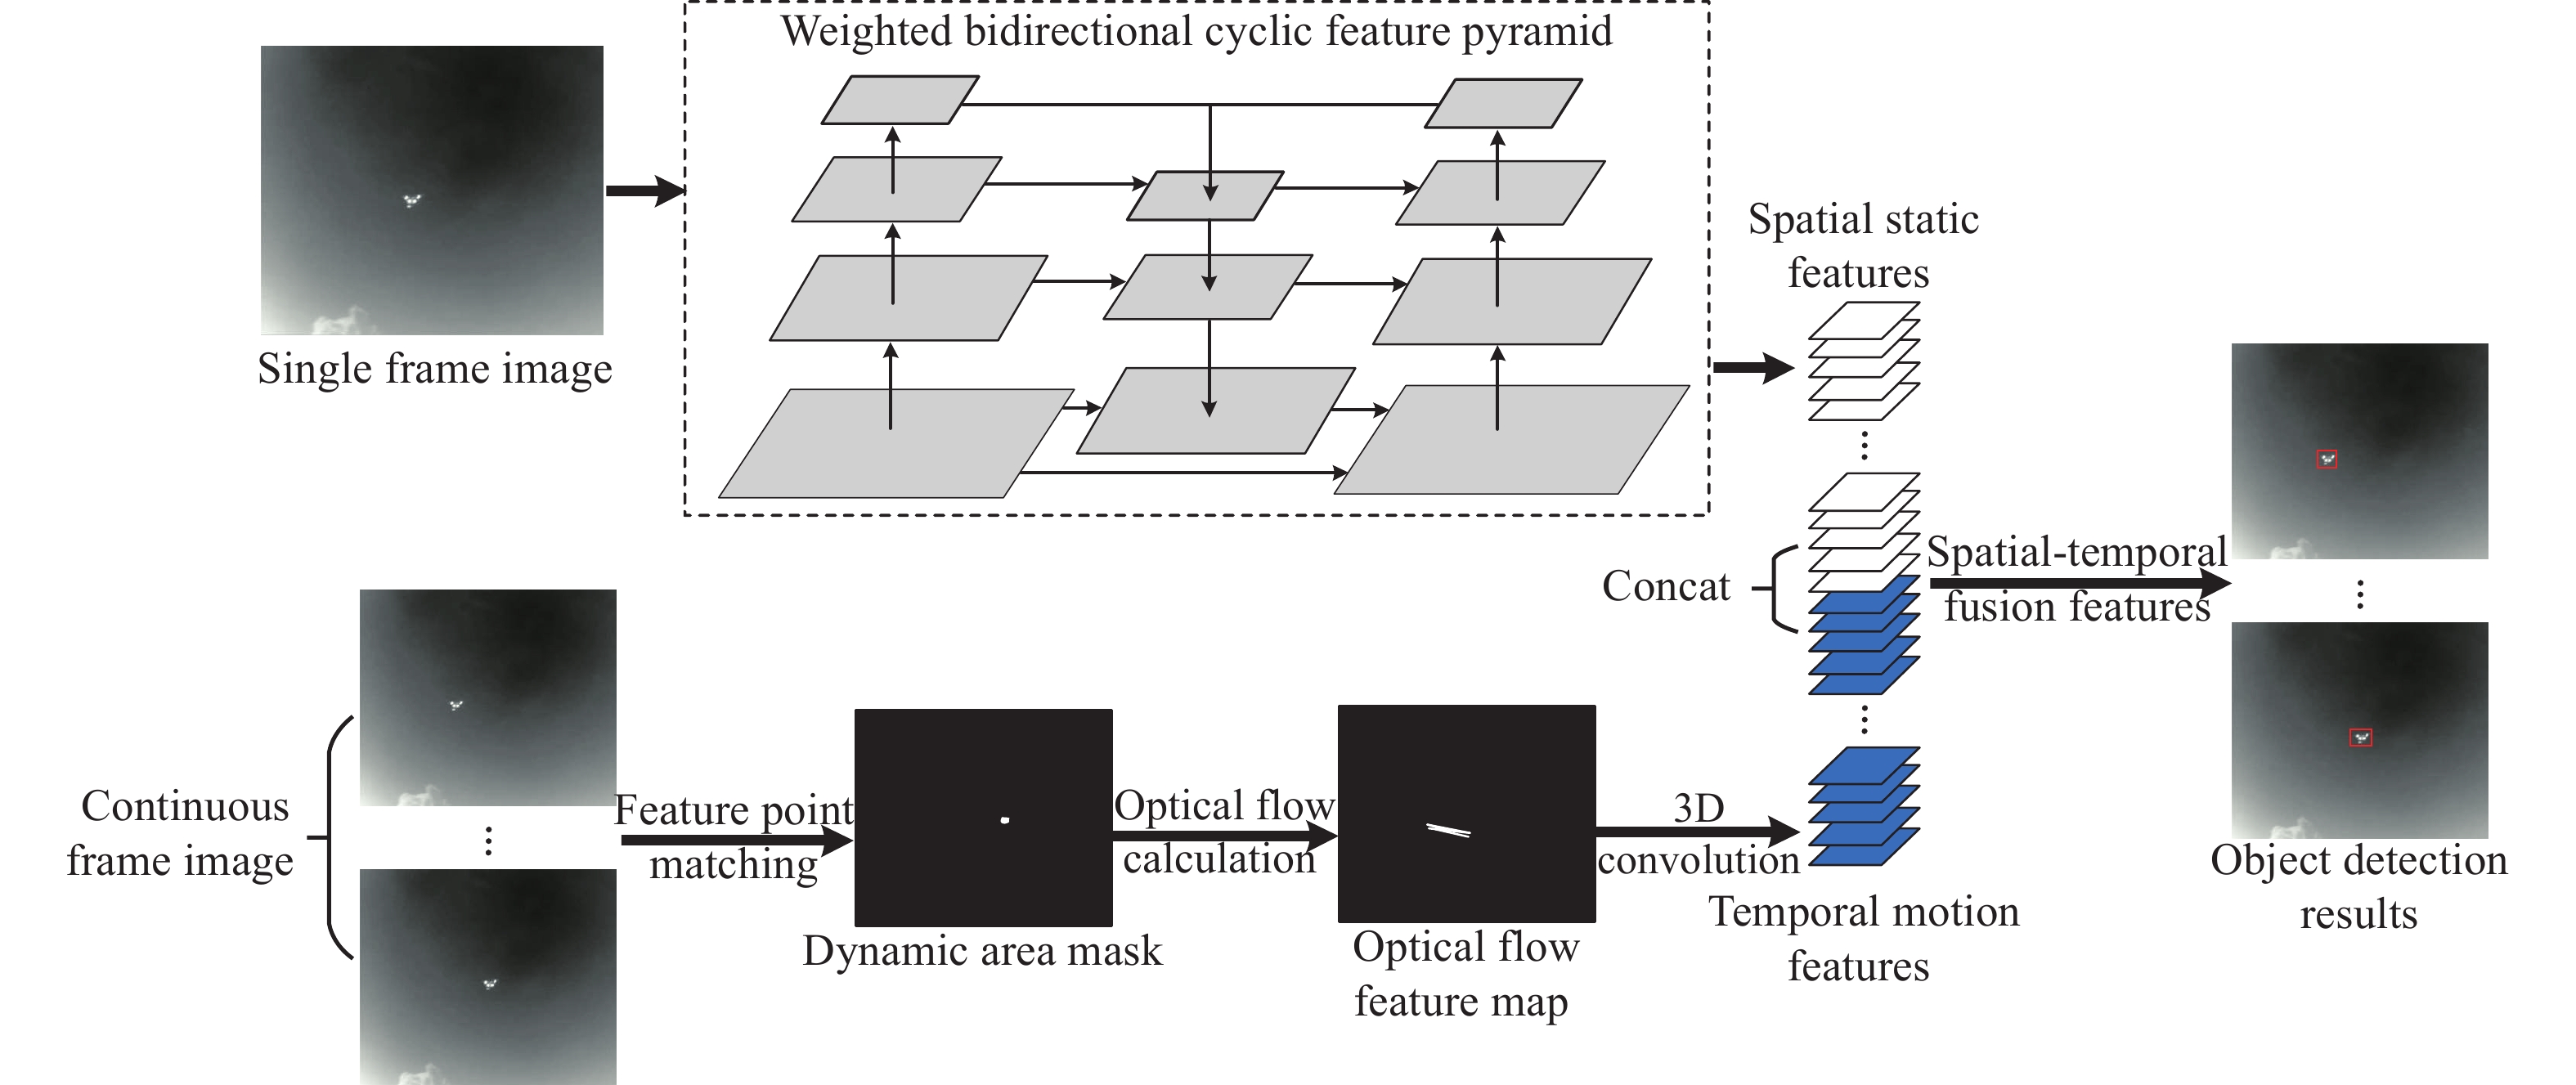 Deep spatial-temporal feature fusion detection network